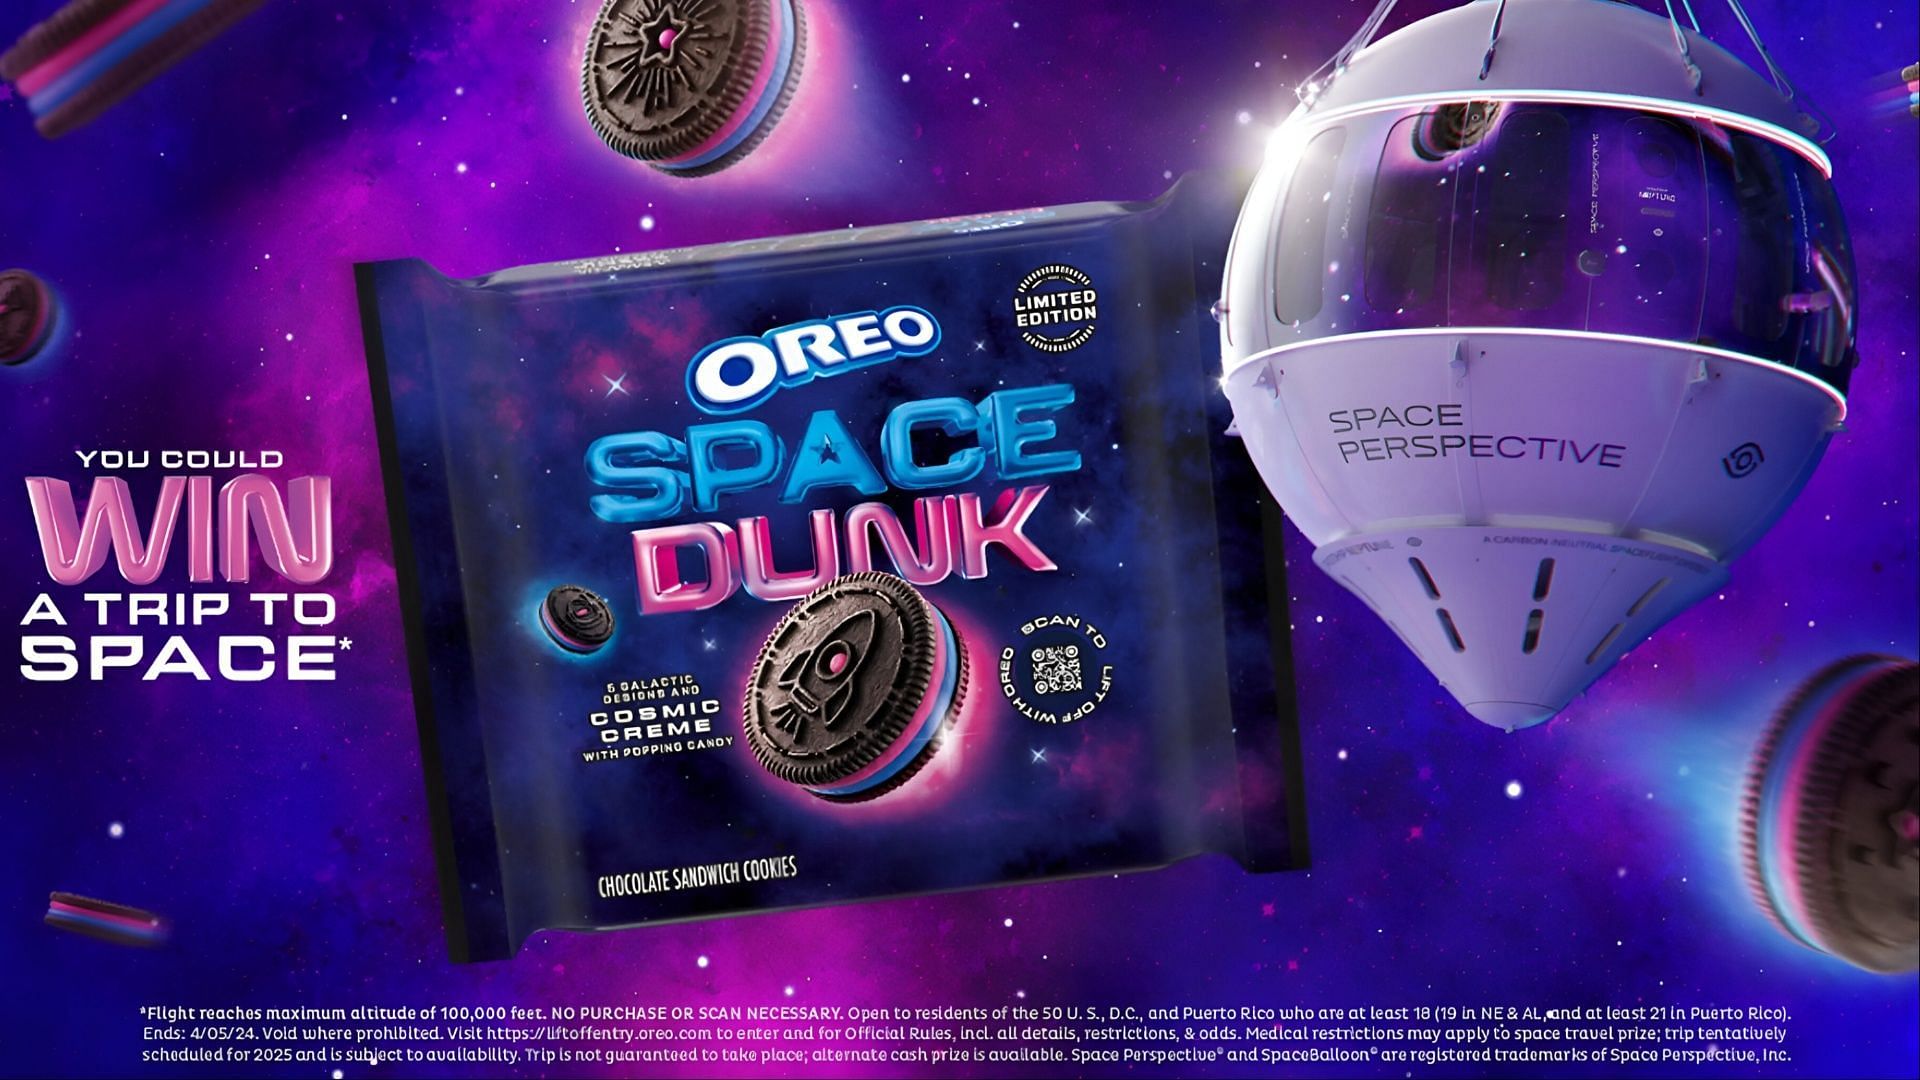 Oreo launches limitededition Space Dunk Cookie Flavor, price